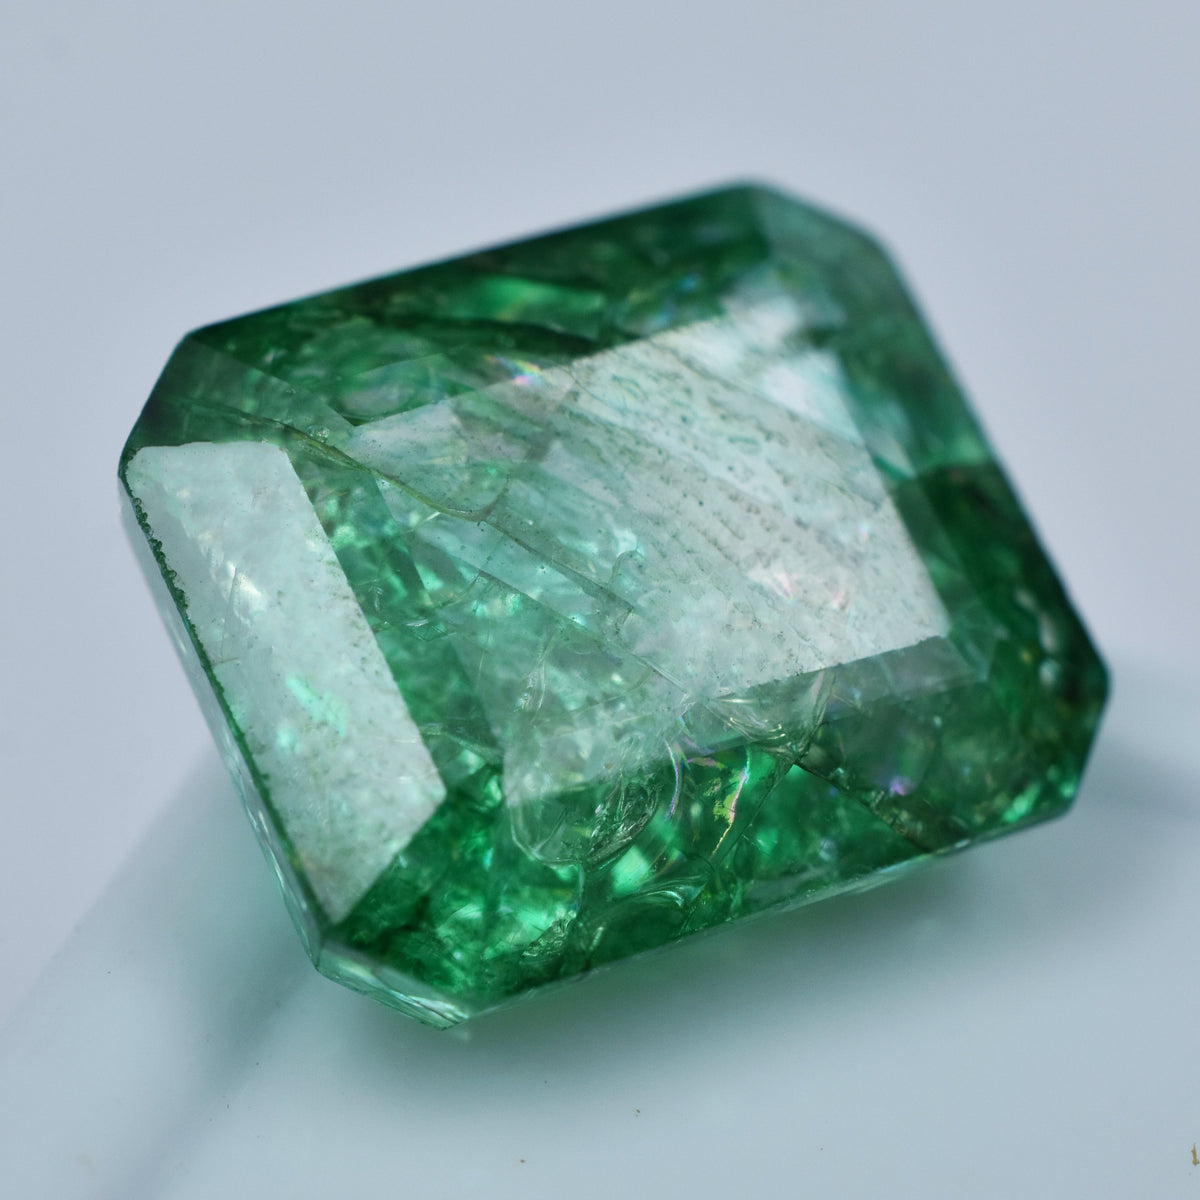 10.55 Carat Emerald Cut Emerald Green Natural CERTIFIED Loose Gemstone | Free Delivery Free Gift | Best Price